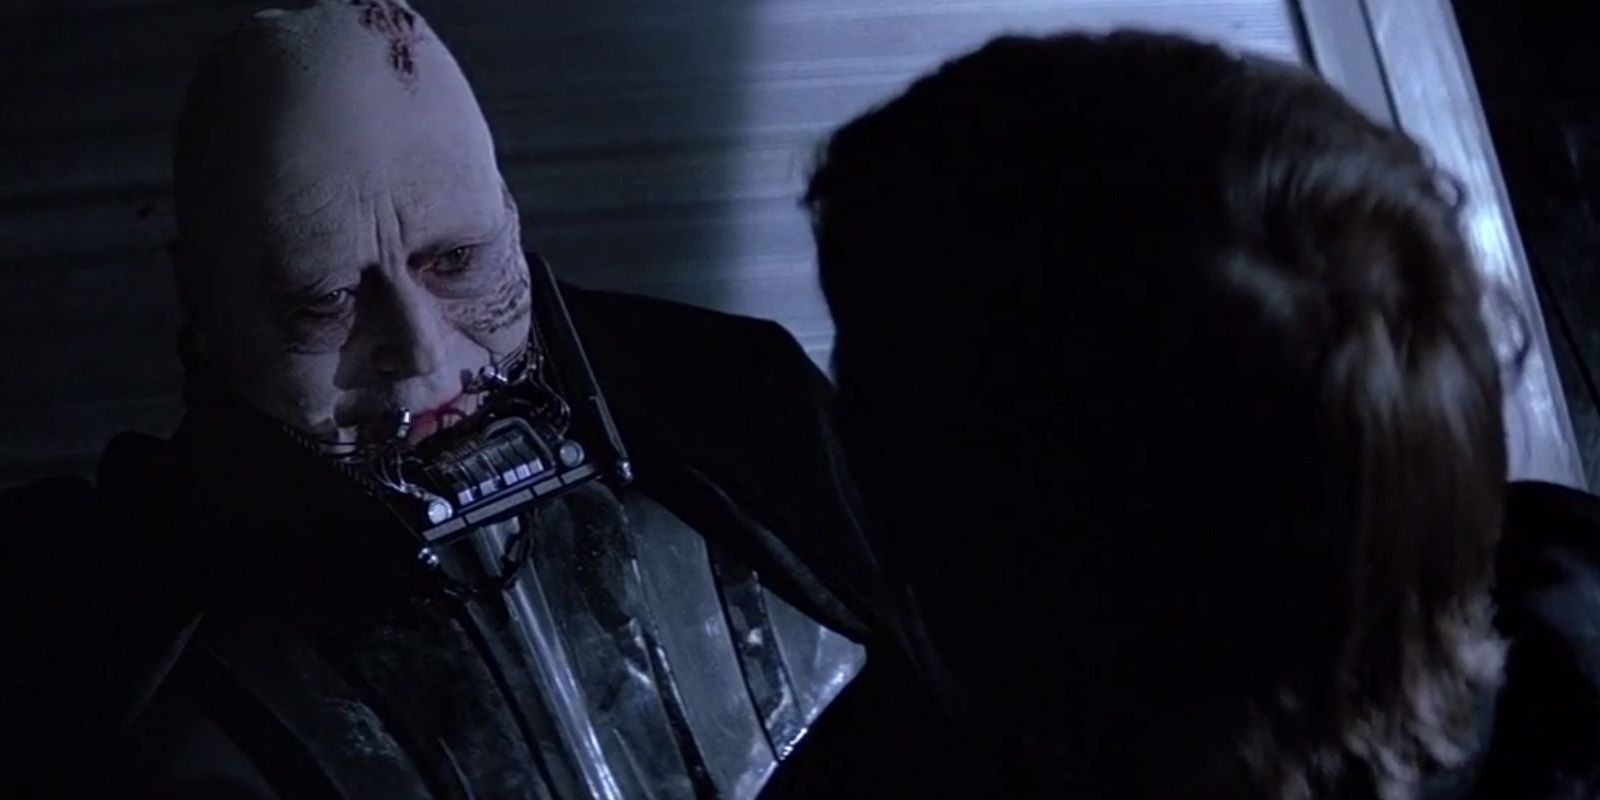 Luke sits in front of Darth Vader, whose mask is off, showing his face. 